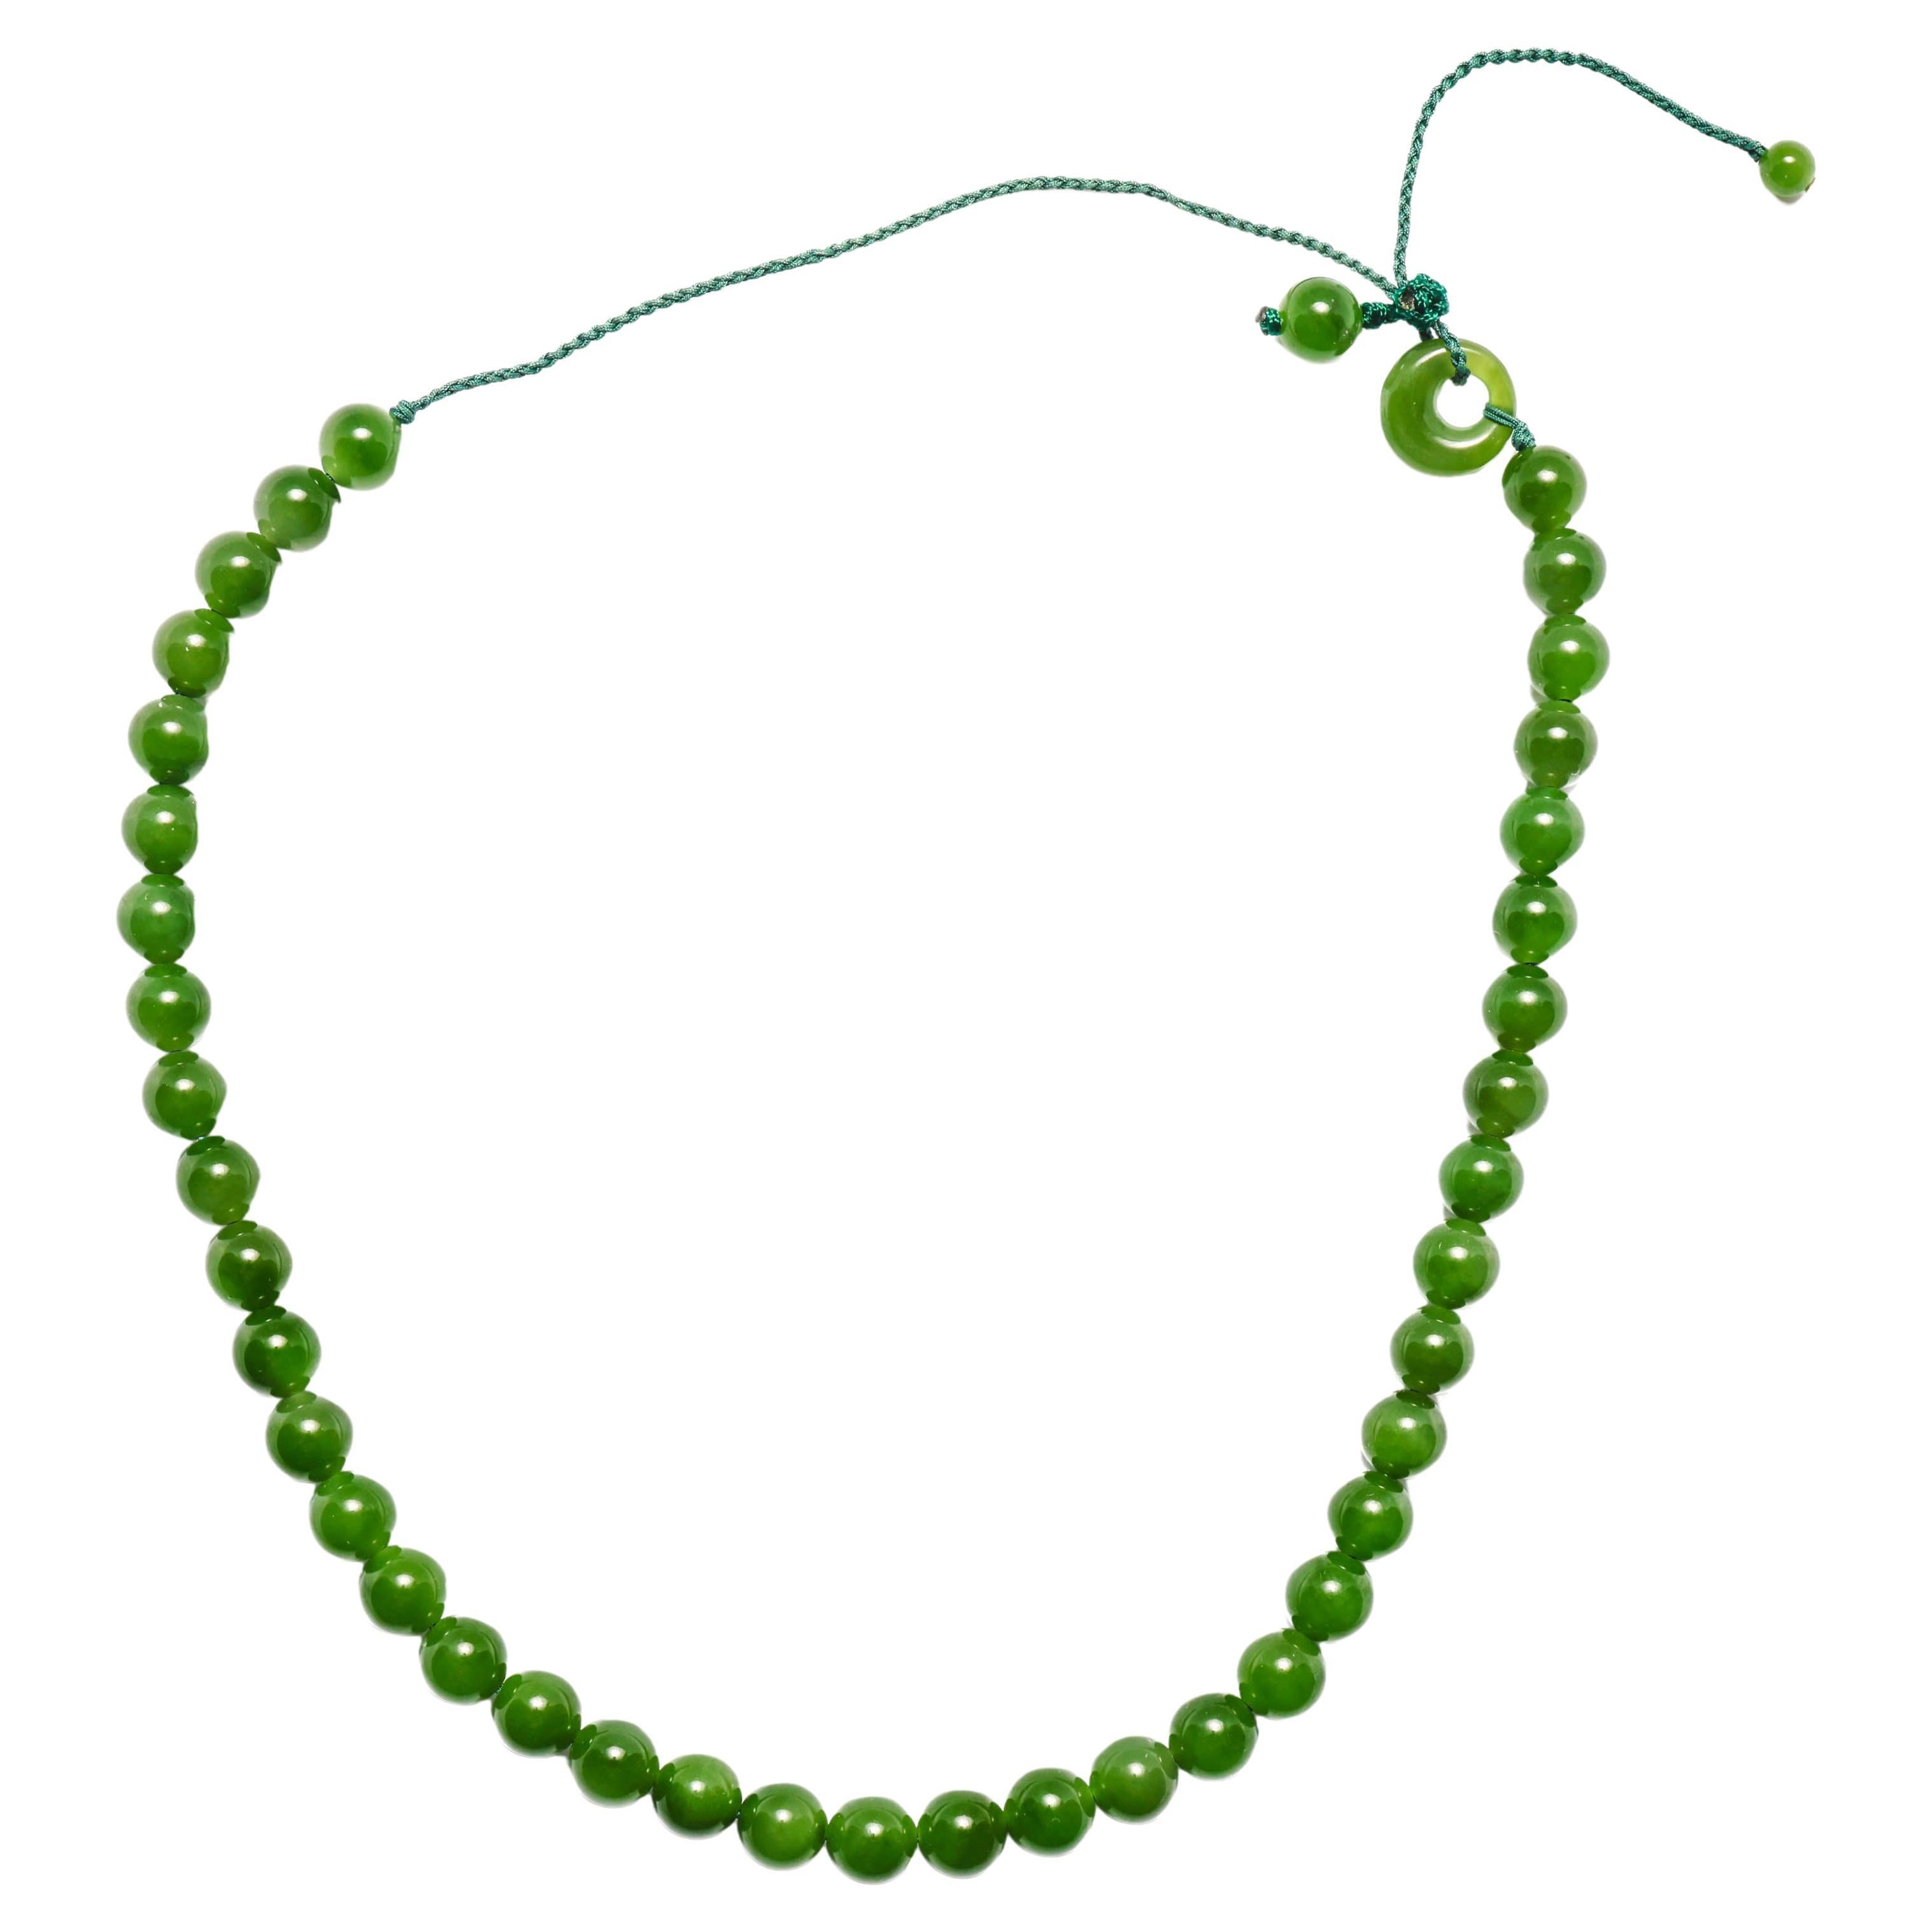 Nephrite Jade Necklace Hand Crafted Certified Untreated For Sale